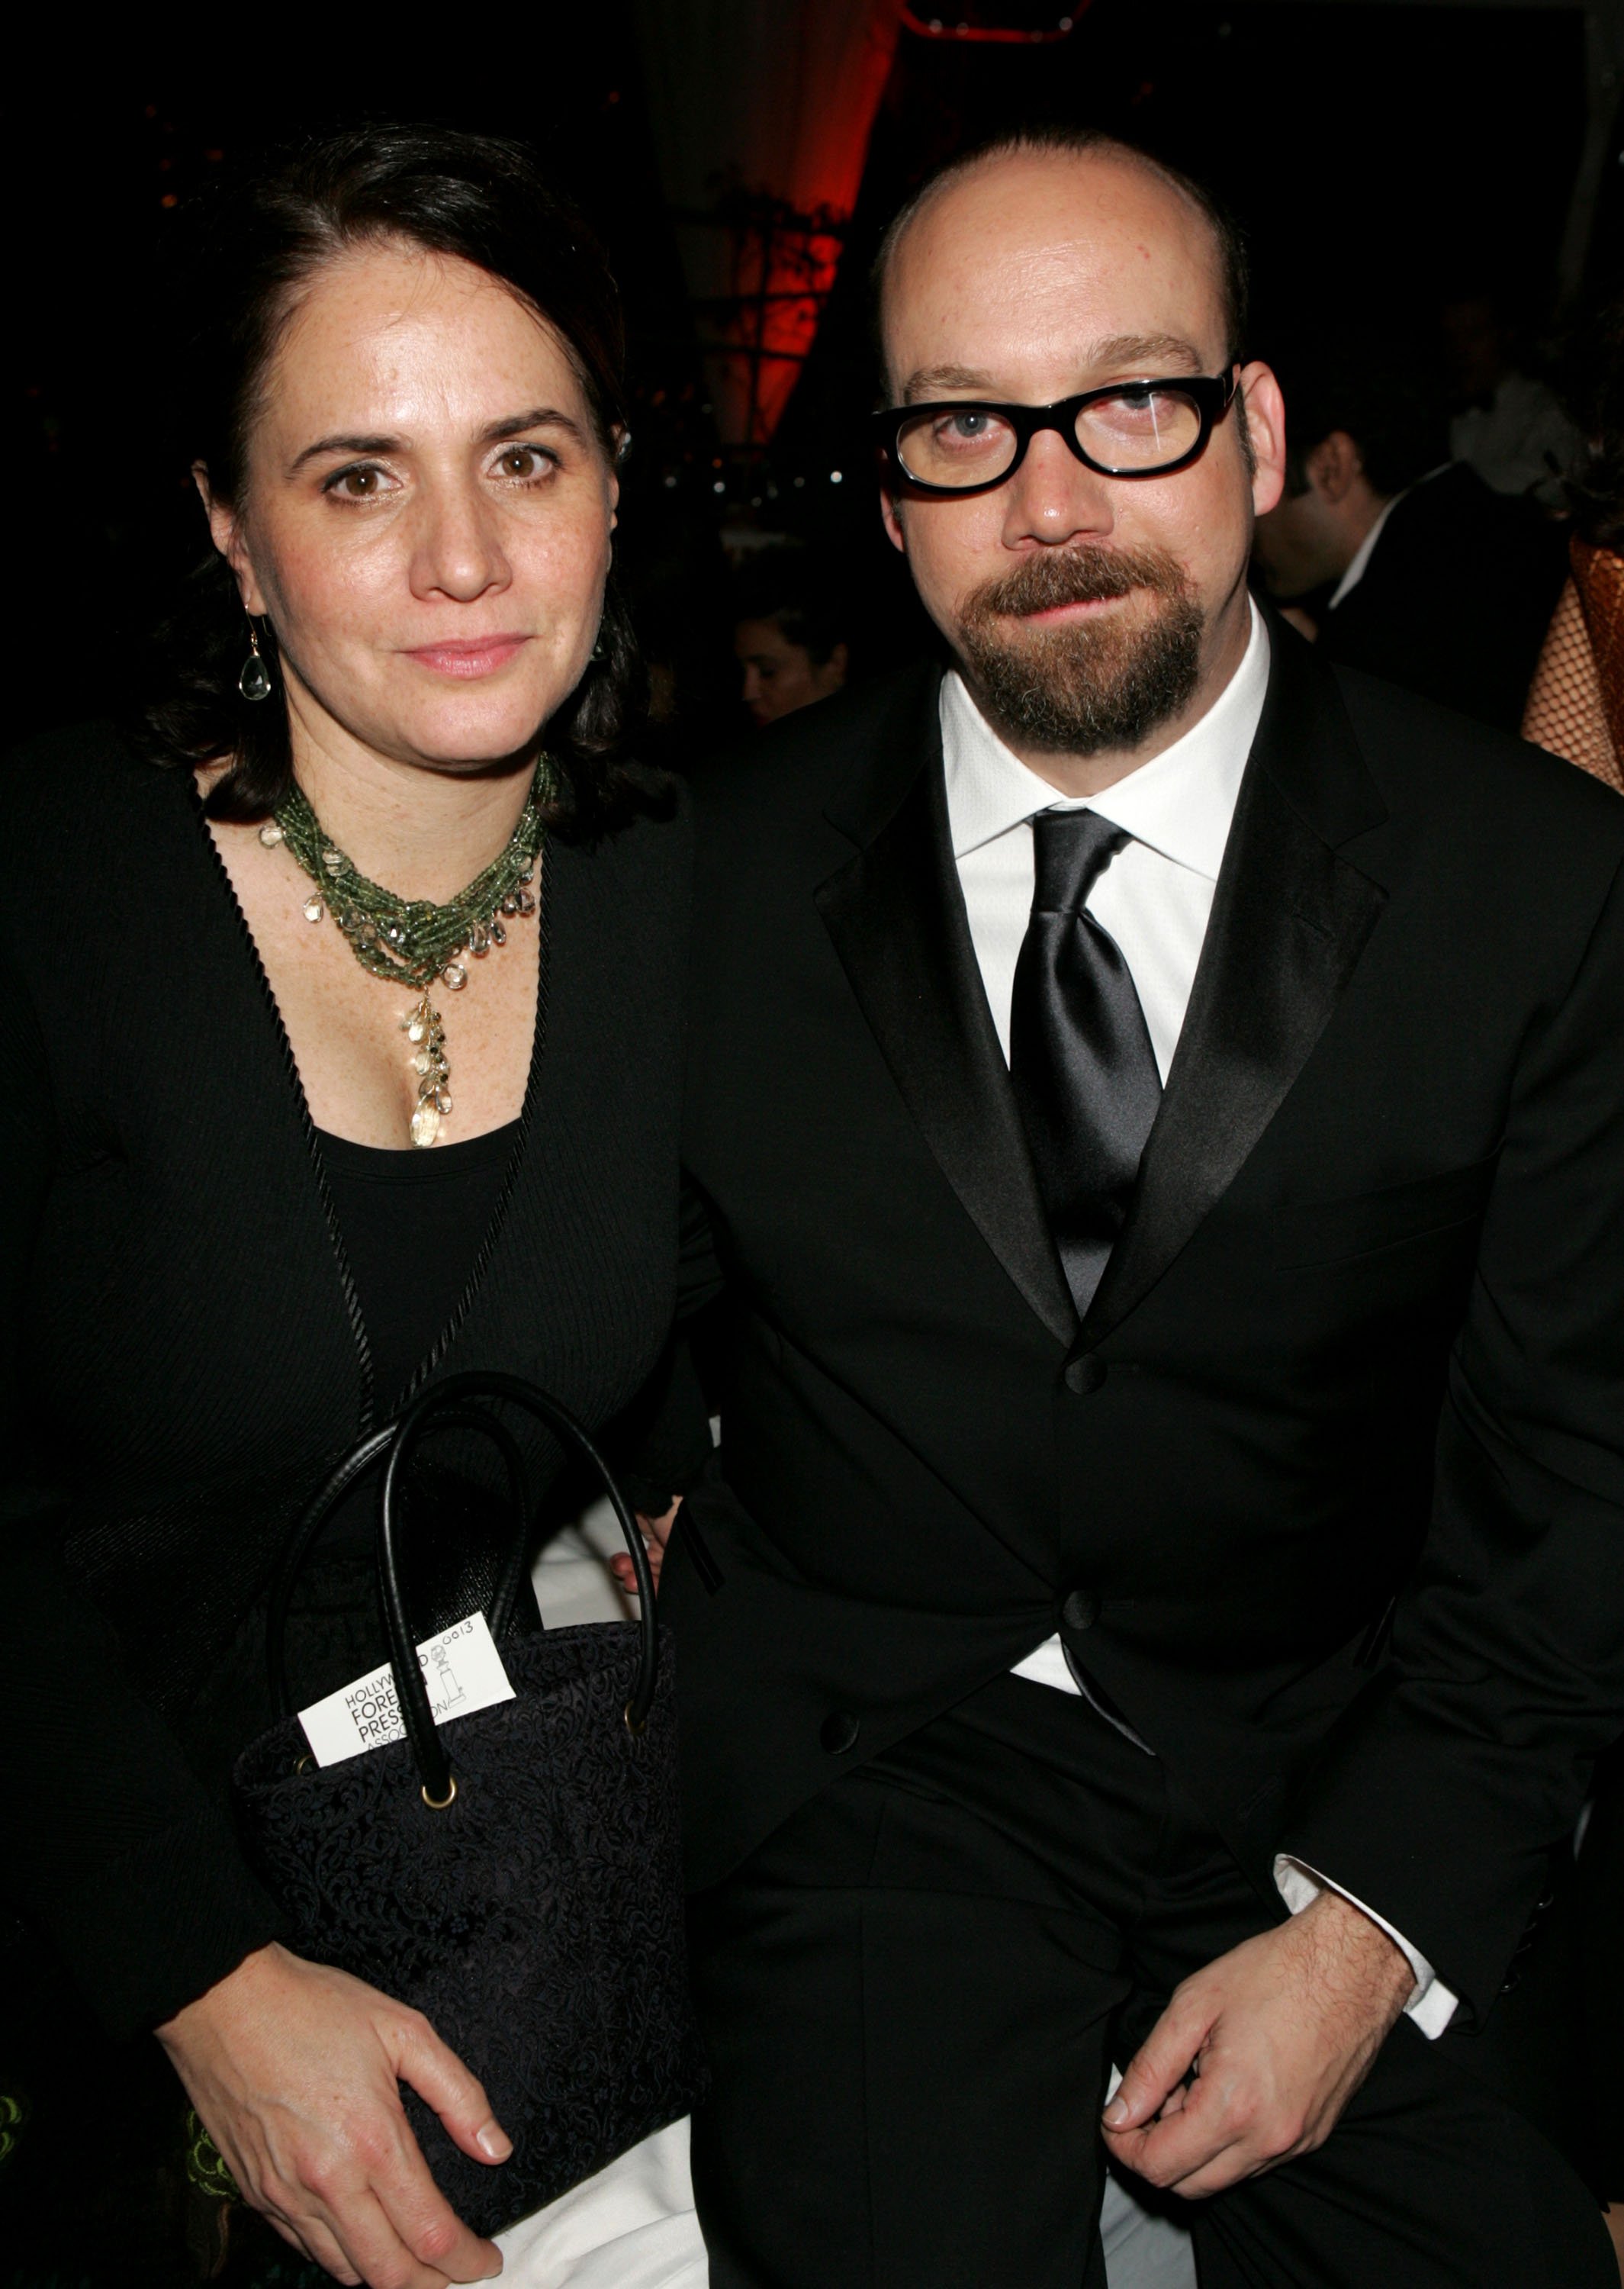 Paul Giamatti and Elizabeth Giamatti during the Fox Golden Globe After Party at the Beverly Hilton Hotel on January 16, 2004, in Beverly Hills, California. | Source: Getty Images